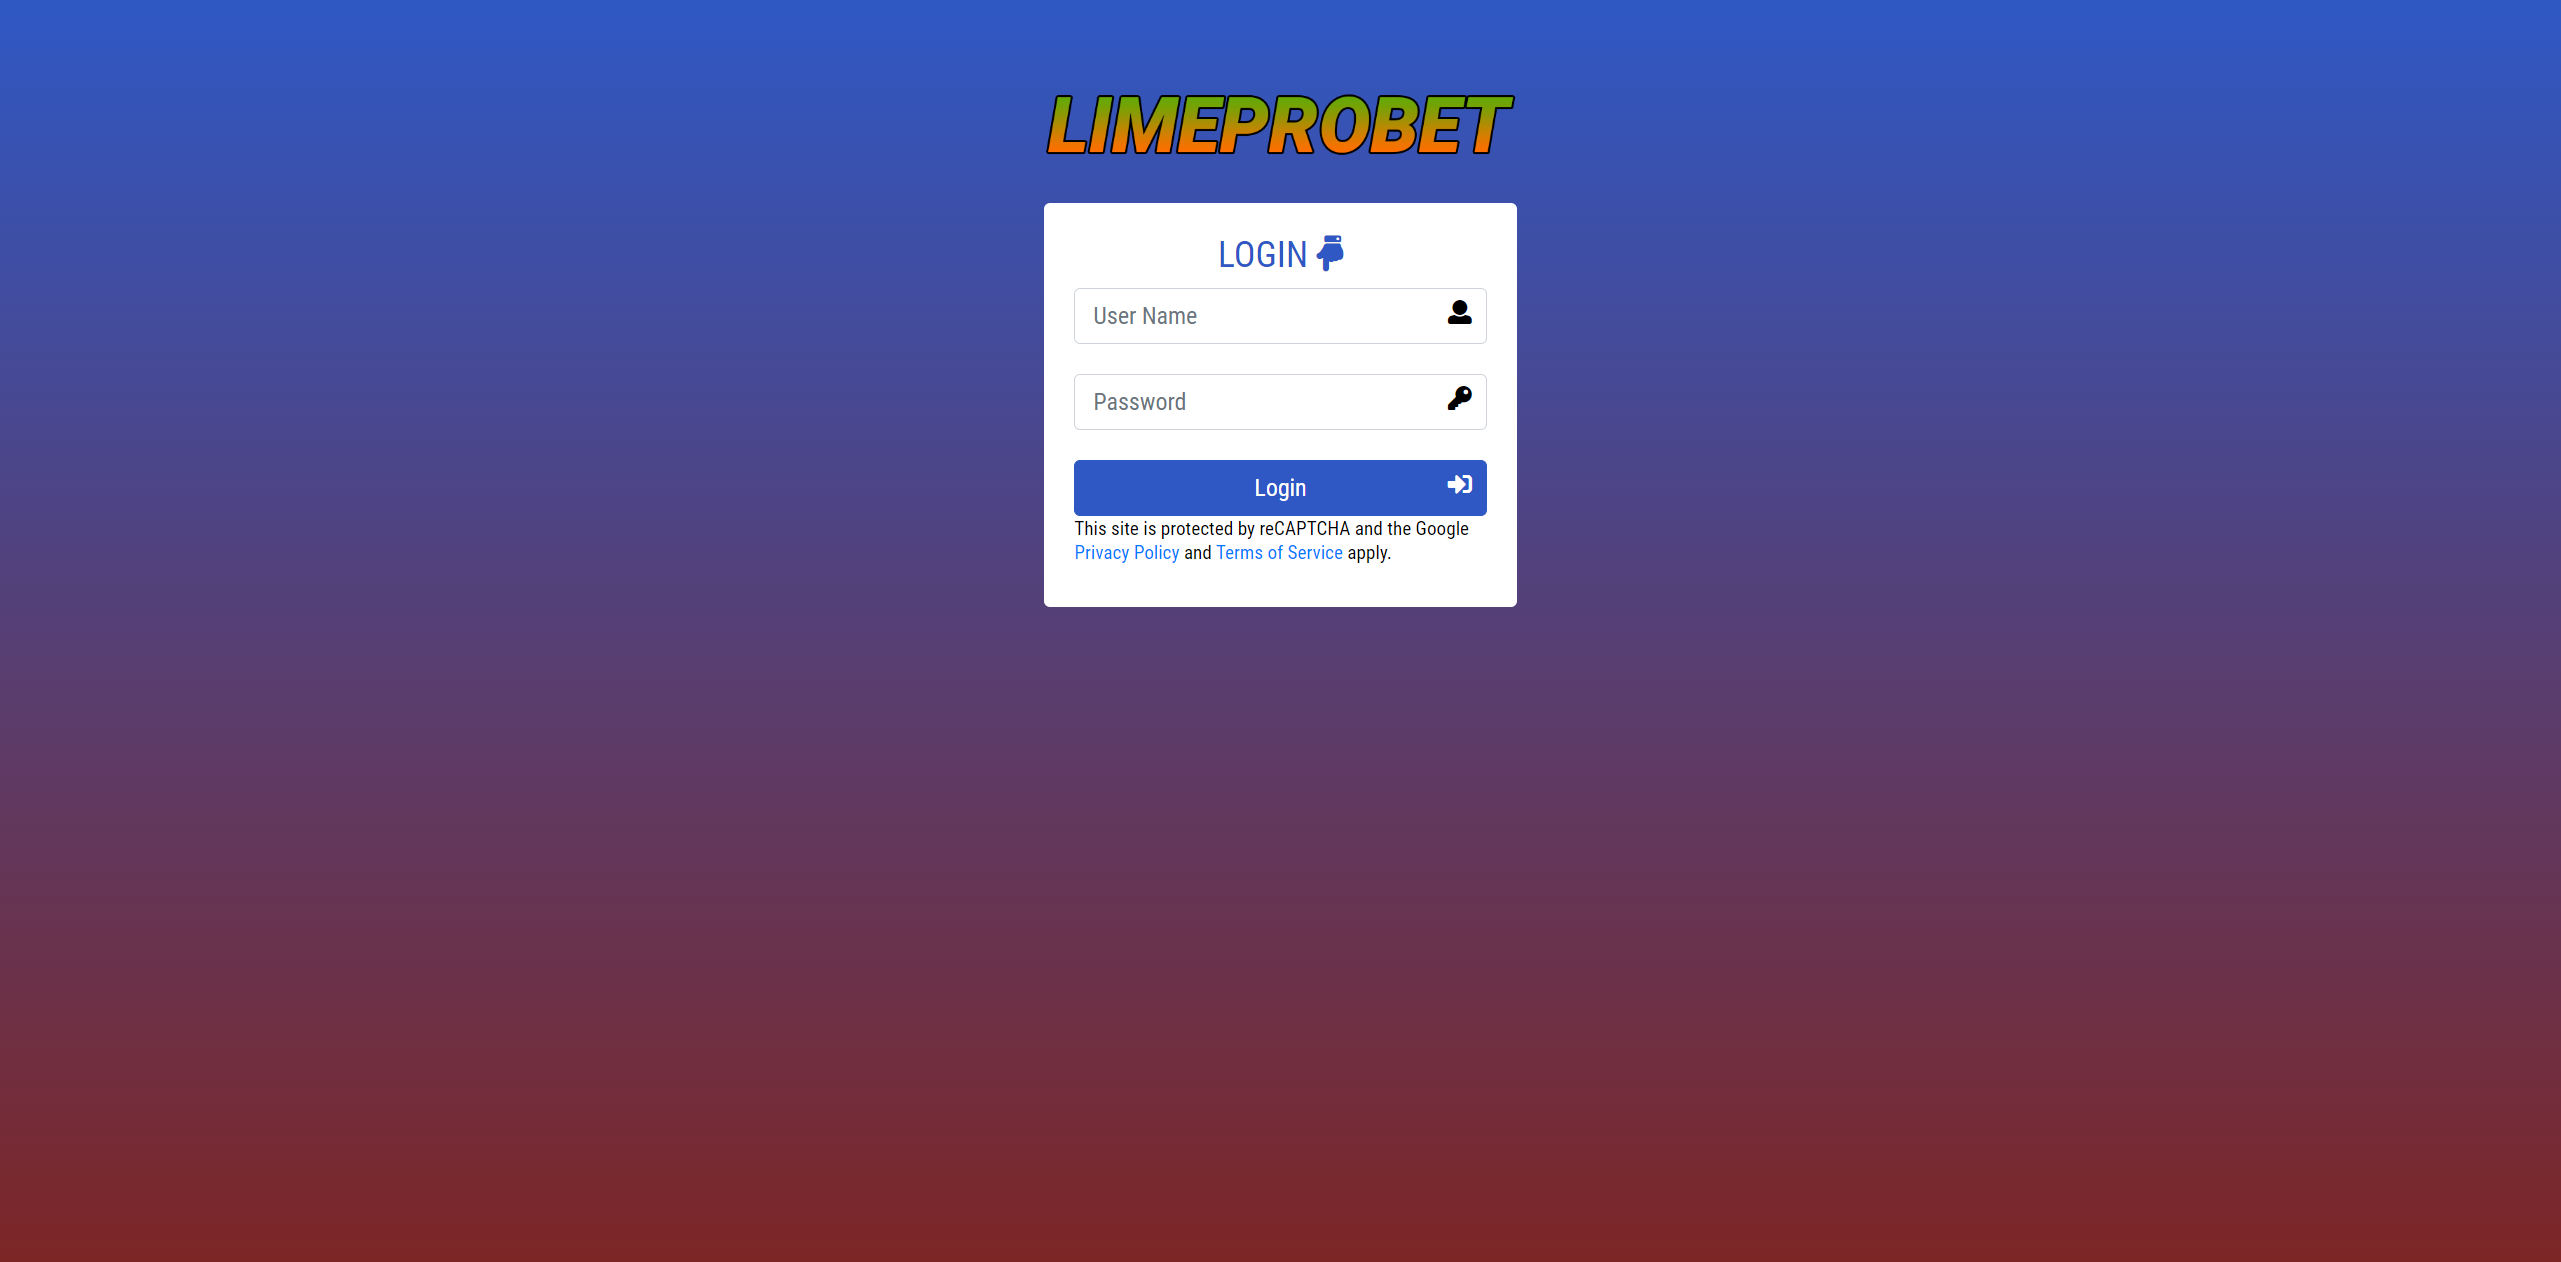 LIMEPROBET great betting experience, bonuses and special offers